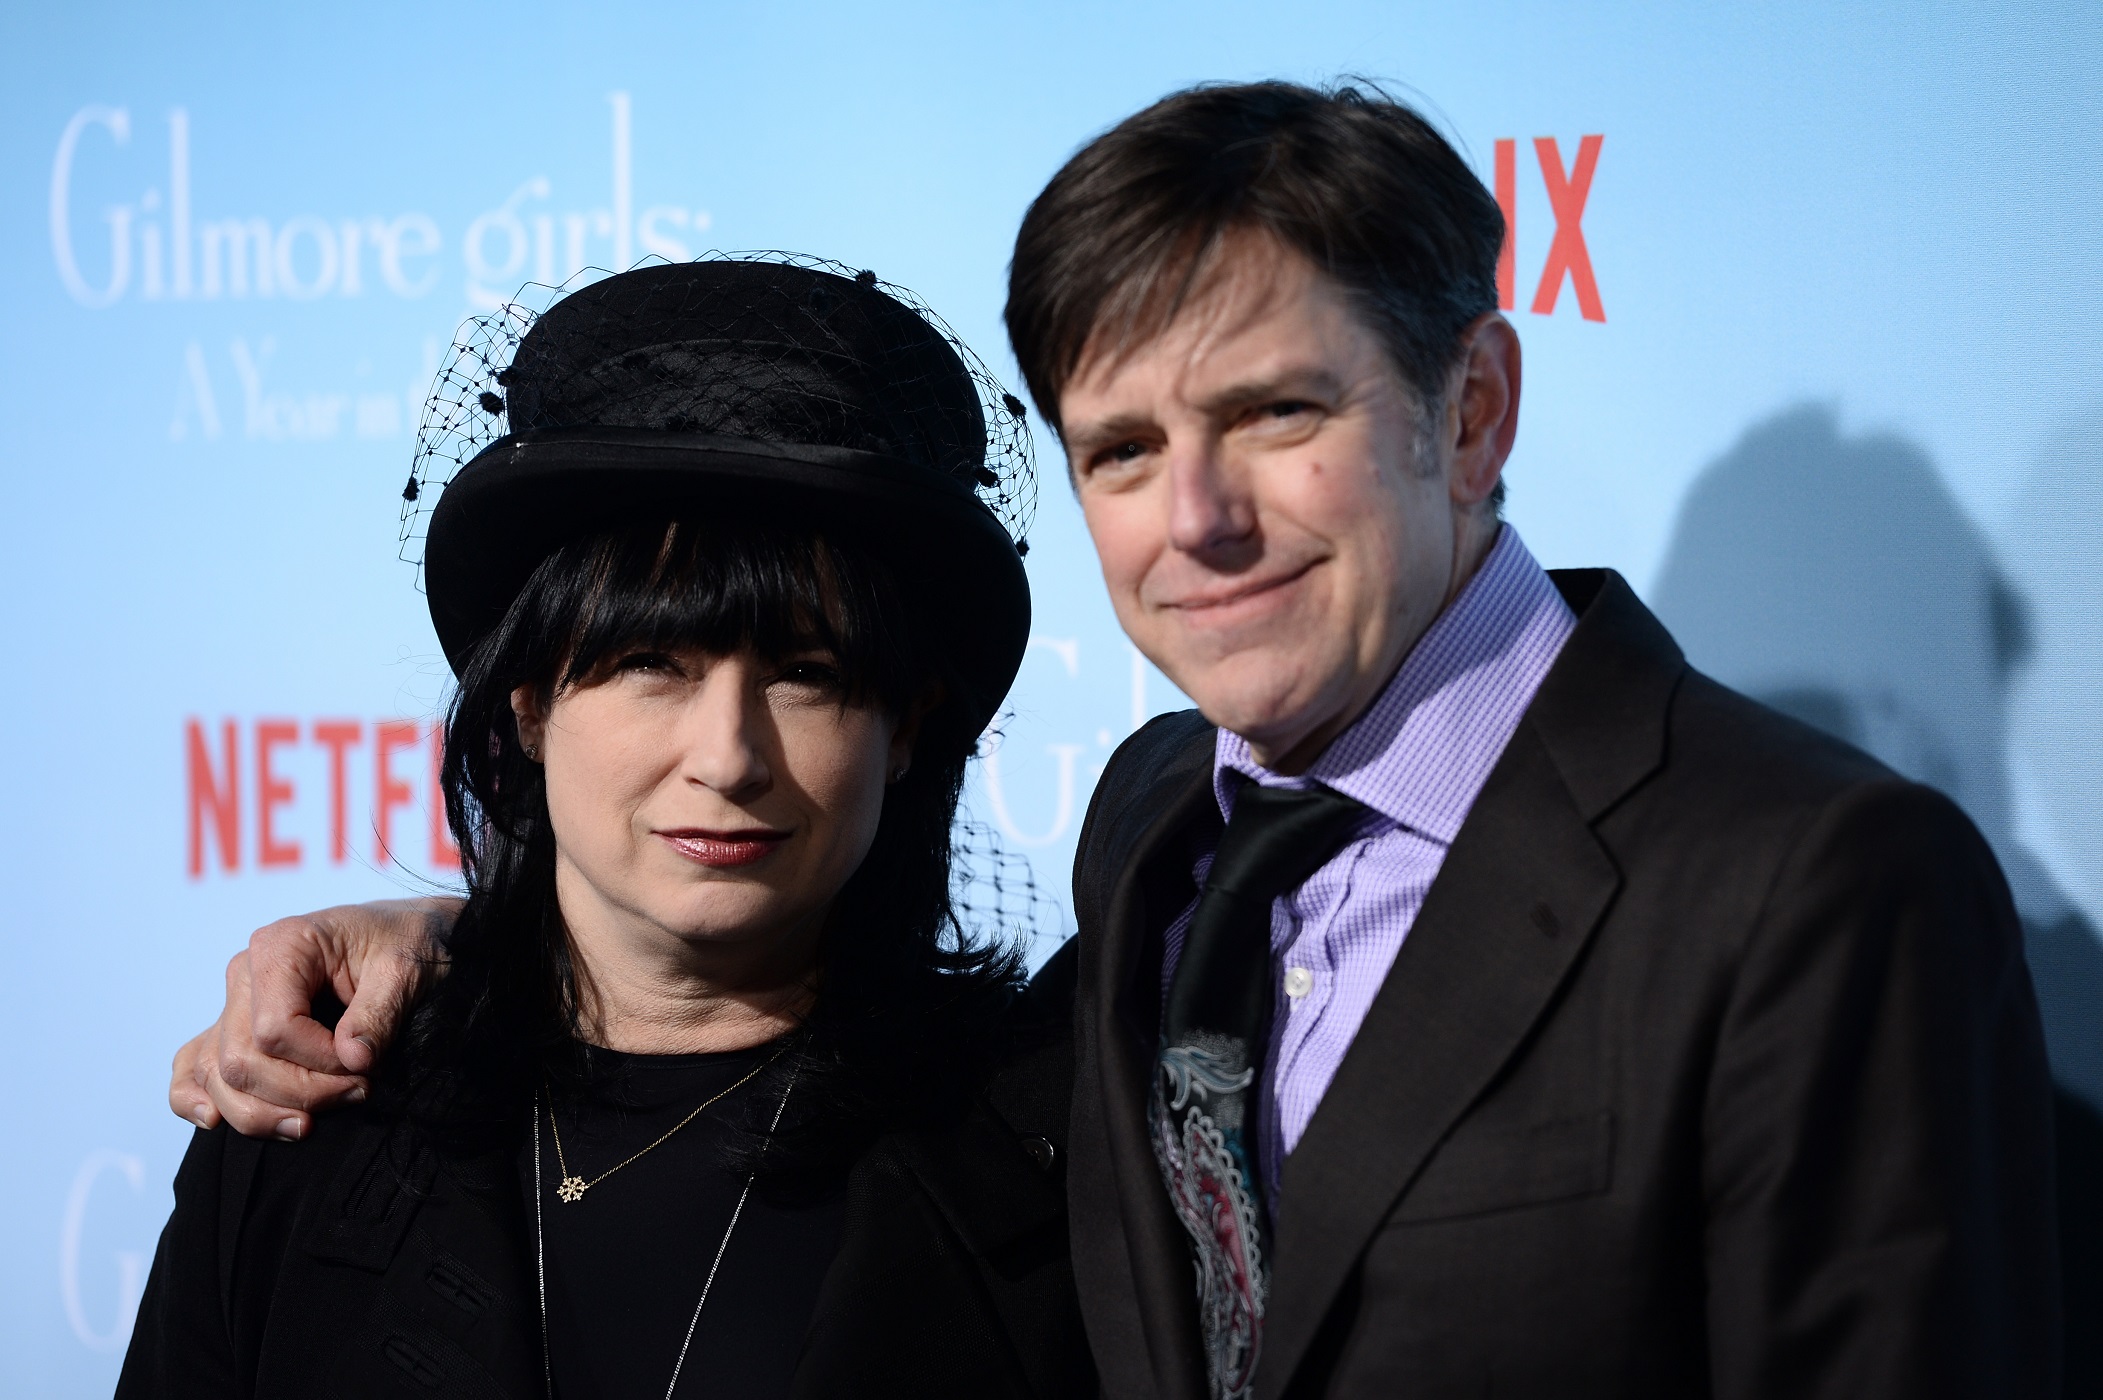 Amy Sherman-Palladino and Dan Palladino arrive at the premiere of Netflix's "'ilmore Girls: A Year In The Life' at the Regency Bruin Theatre